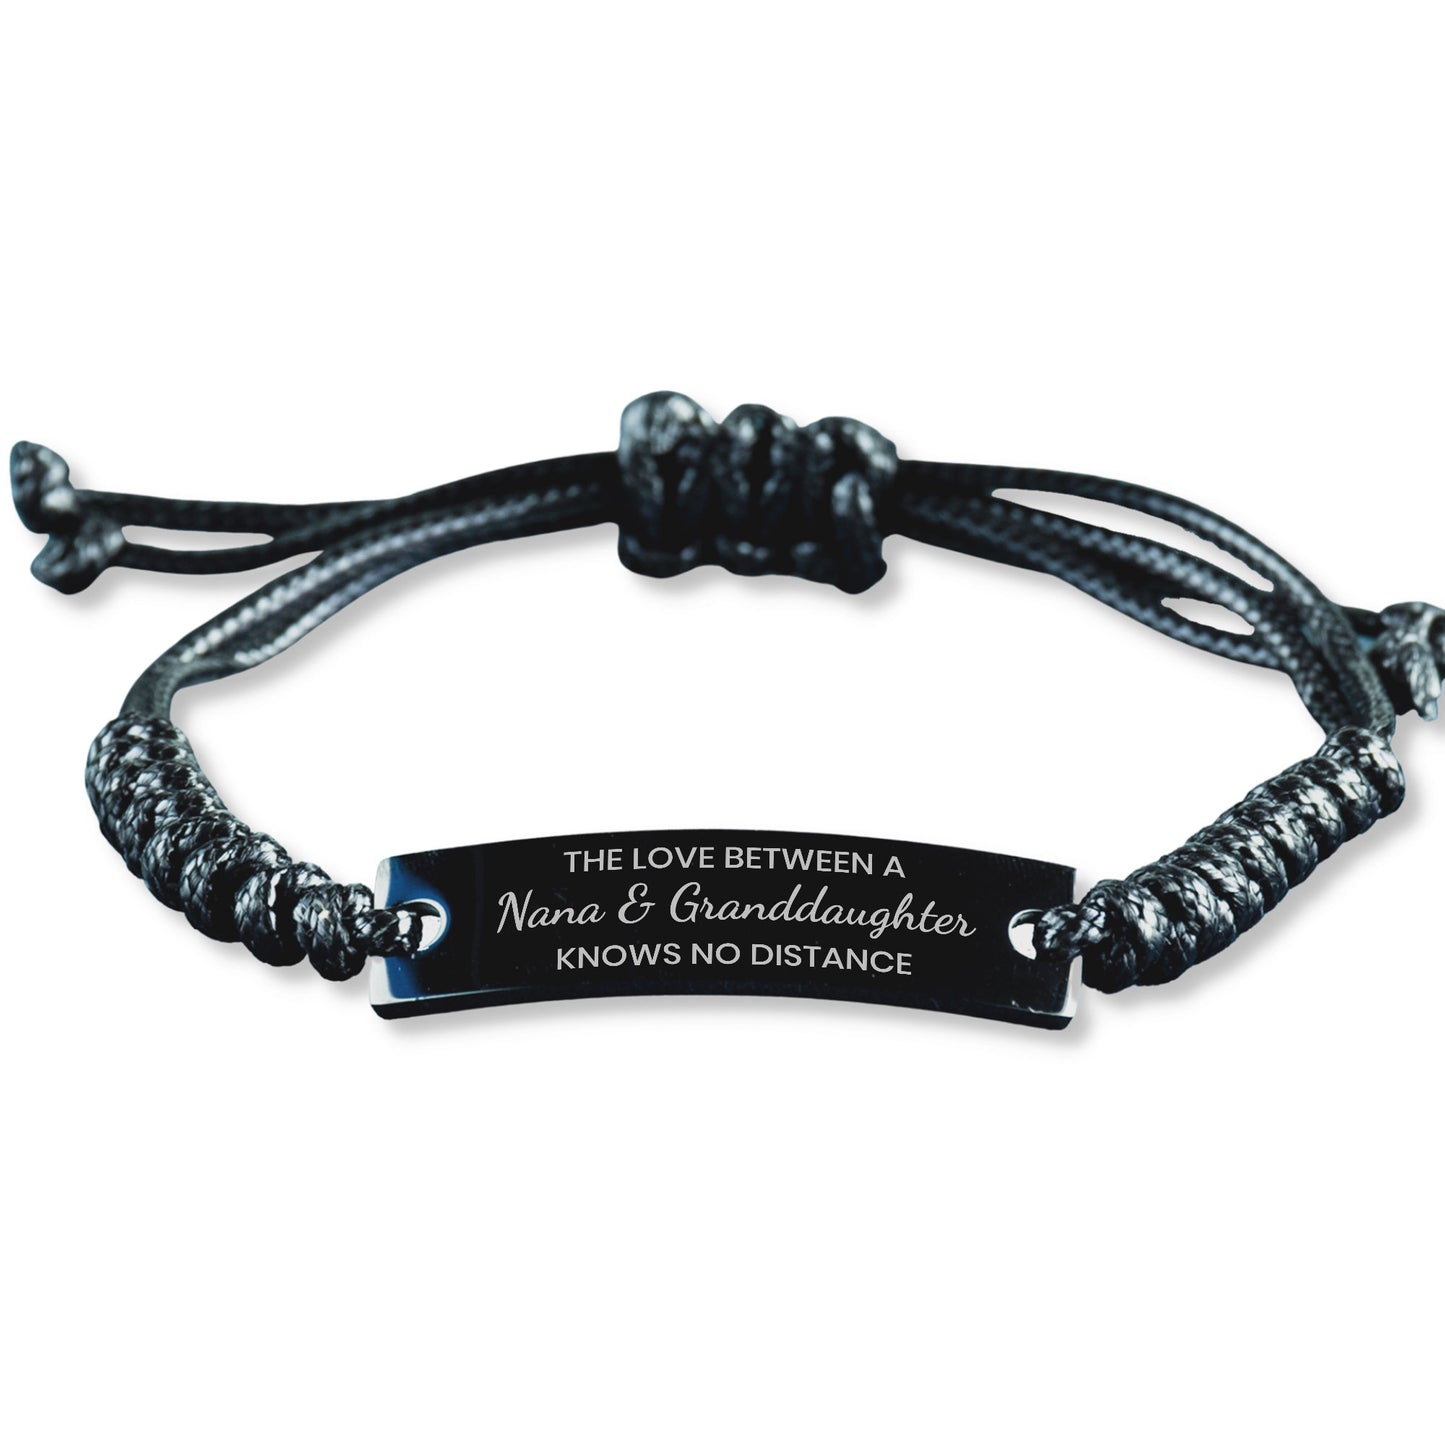 The Love Between a Nana and Granddaughter Knows No Distance Bracelet, Nana Granddaughter Bracelet, Black Braided Rope Bracelet